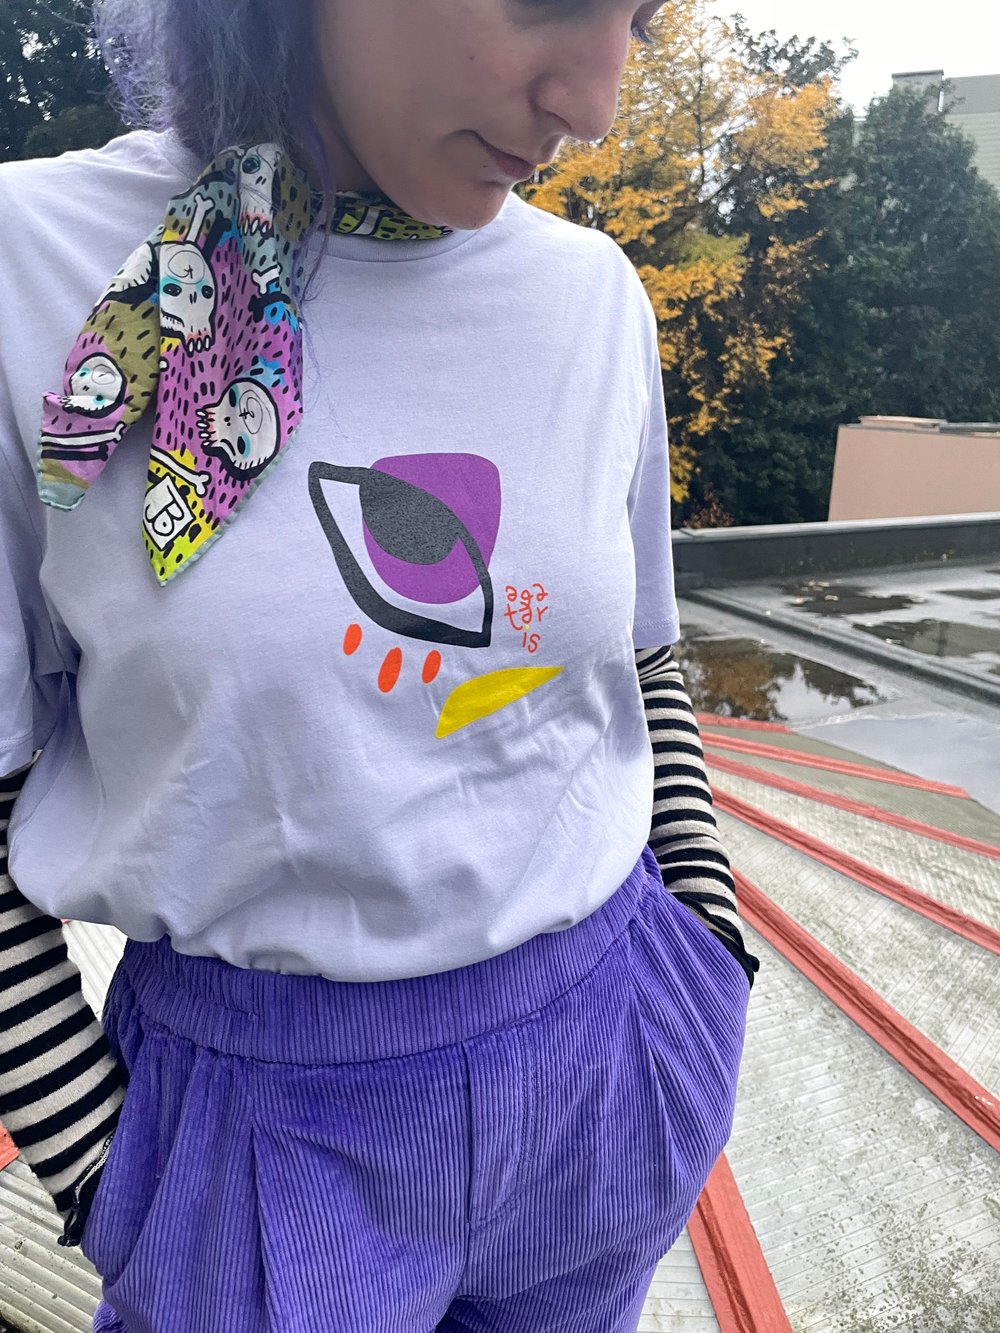 Image of Face lilac tshirt